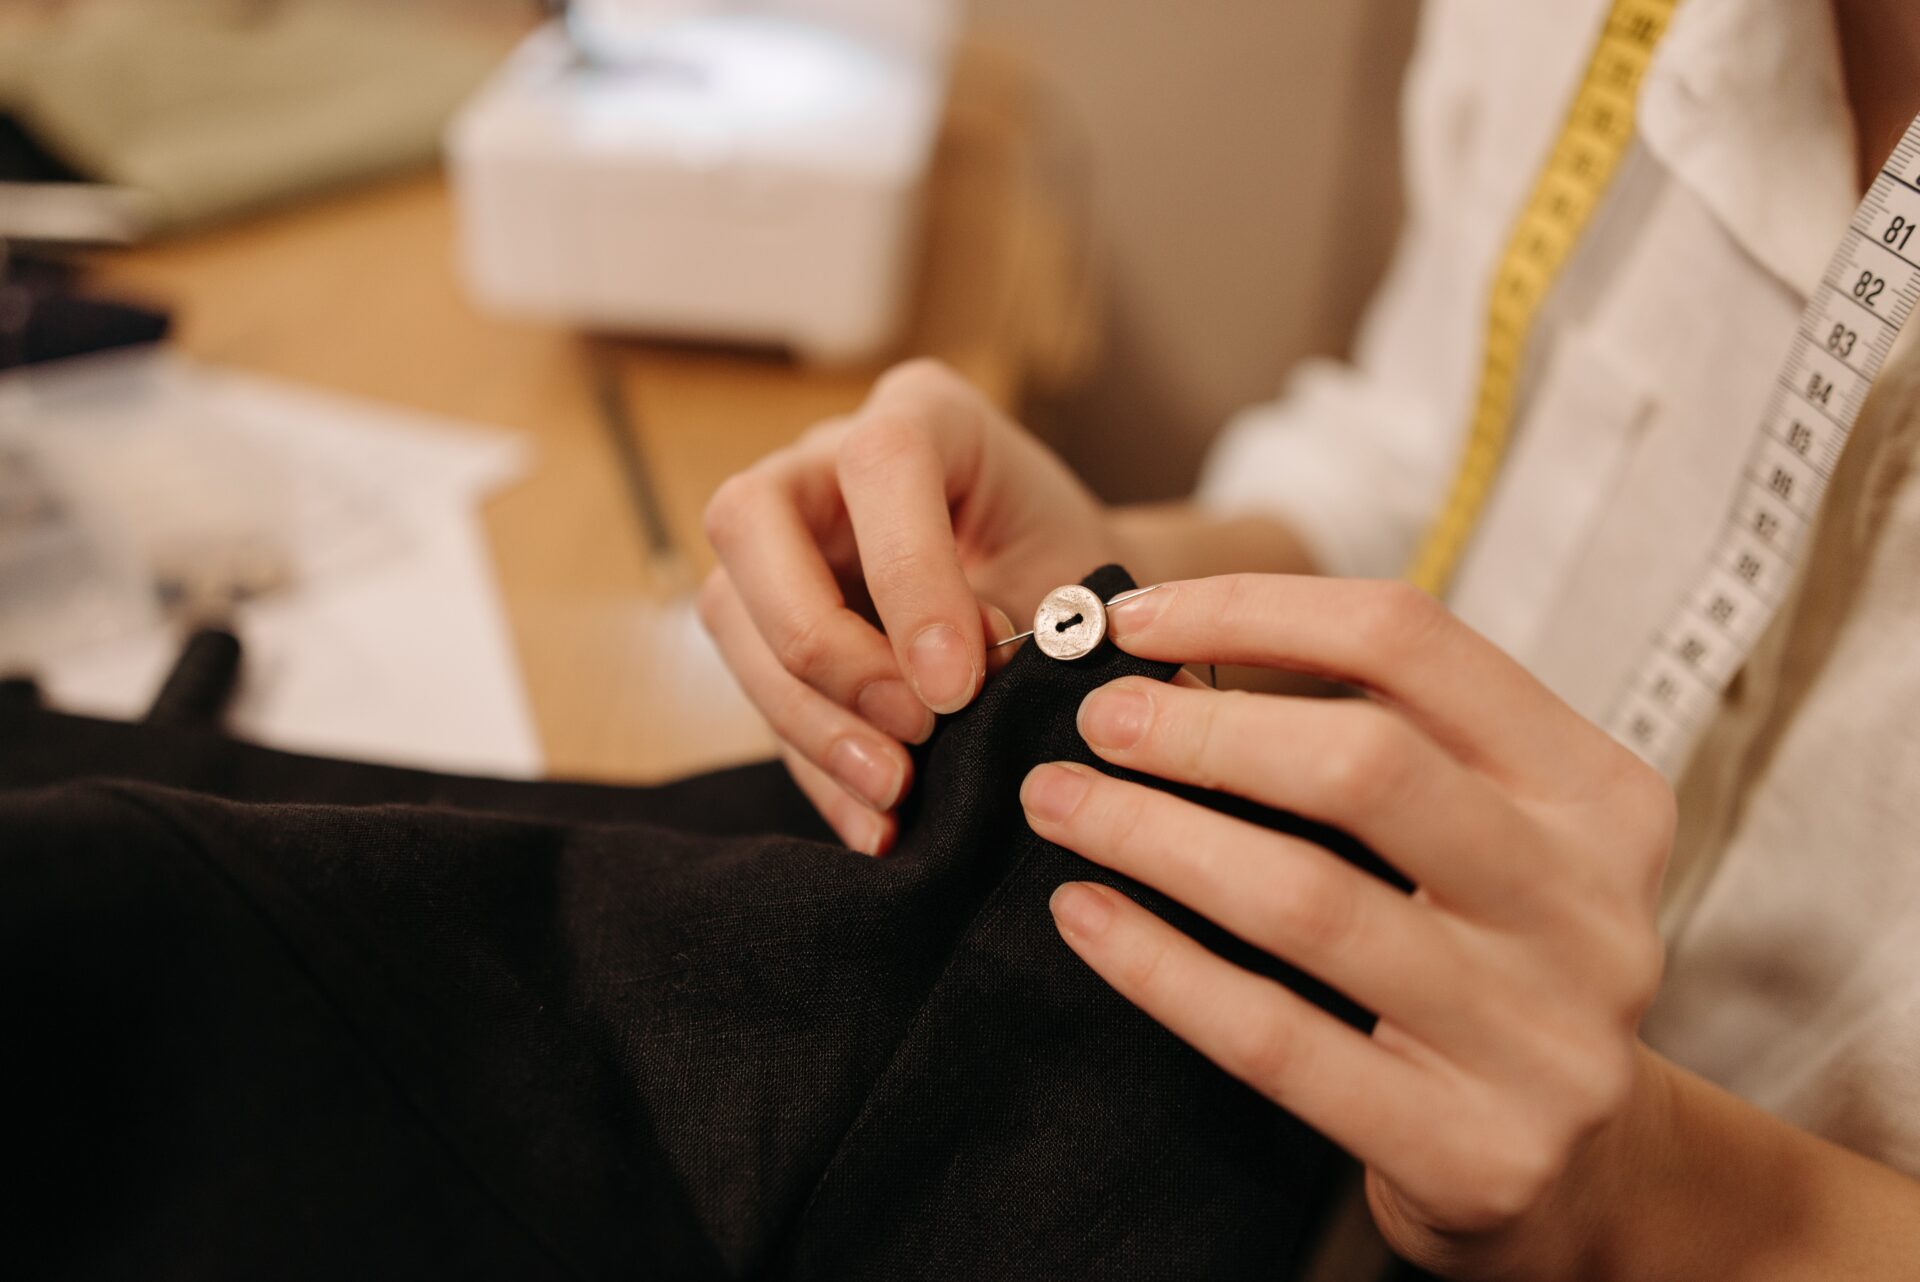 A woman is sewing a button on a shirt.